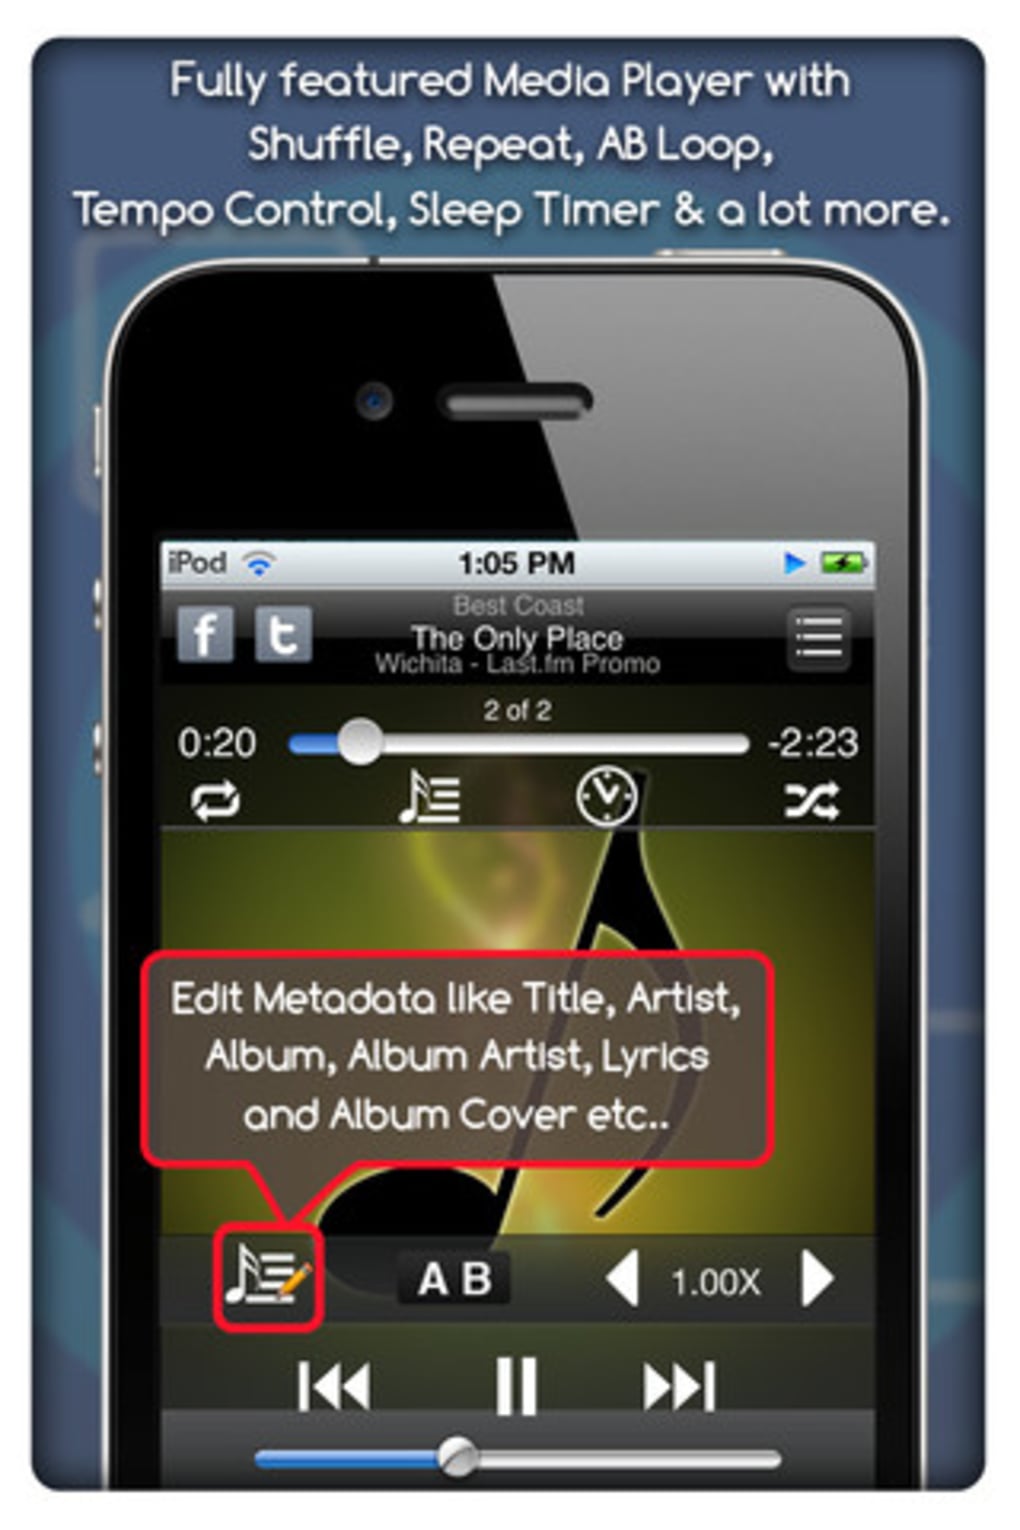 download mp3 to my iphone